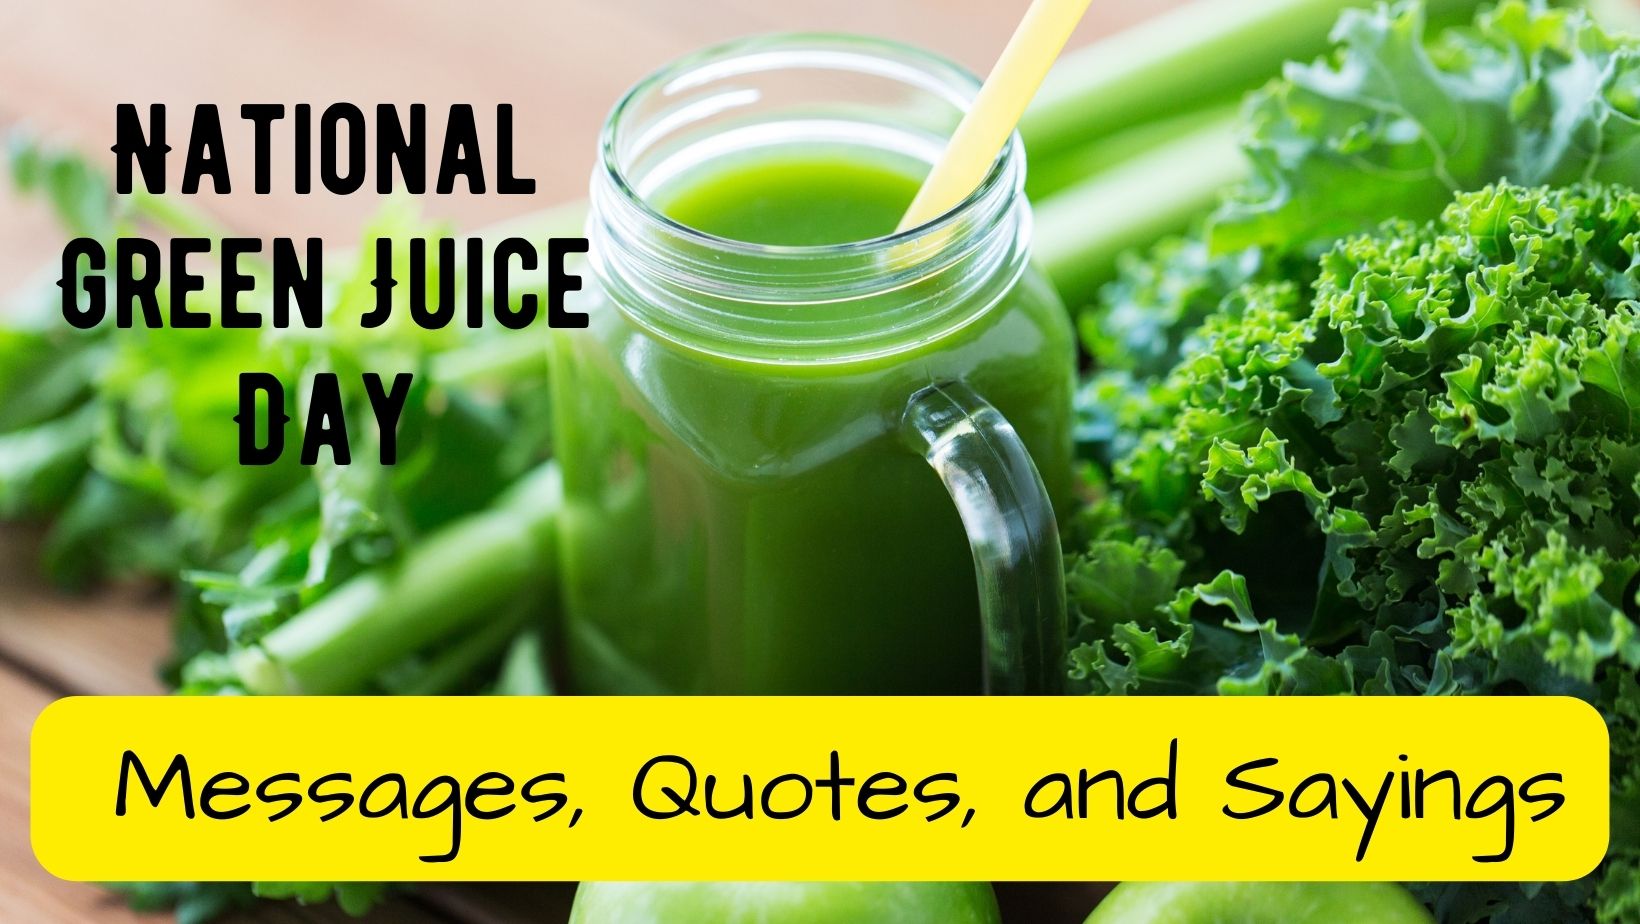 National Green Juice Day Messages, Quotes, and Sayings with a